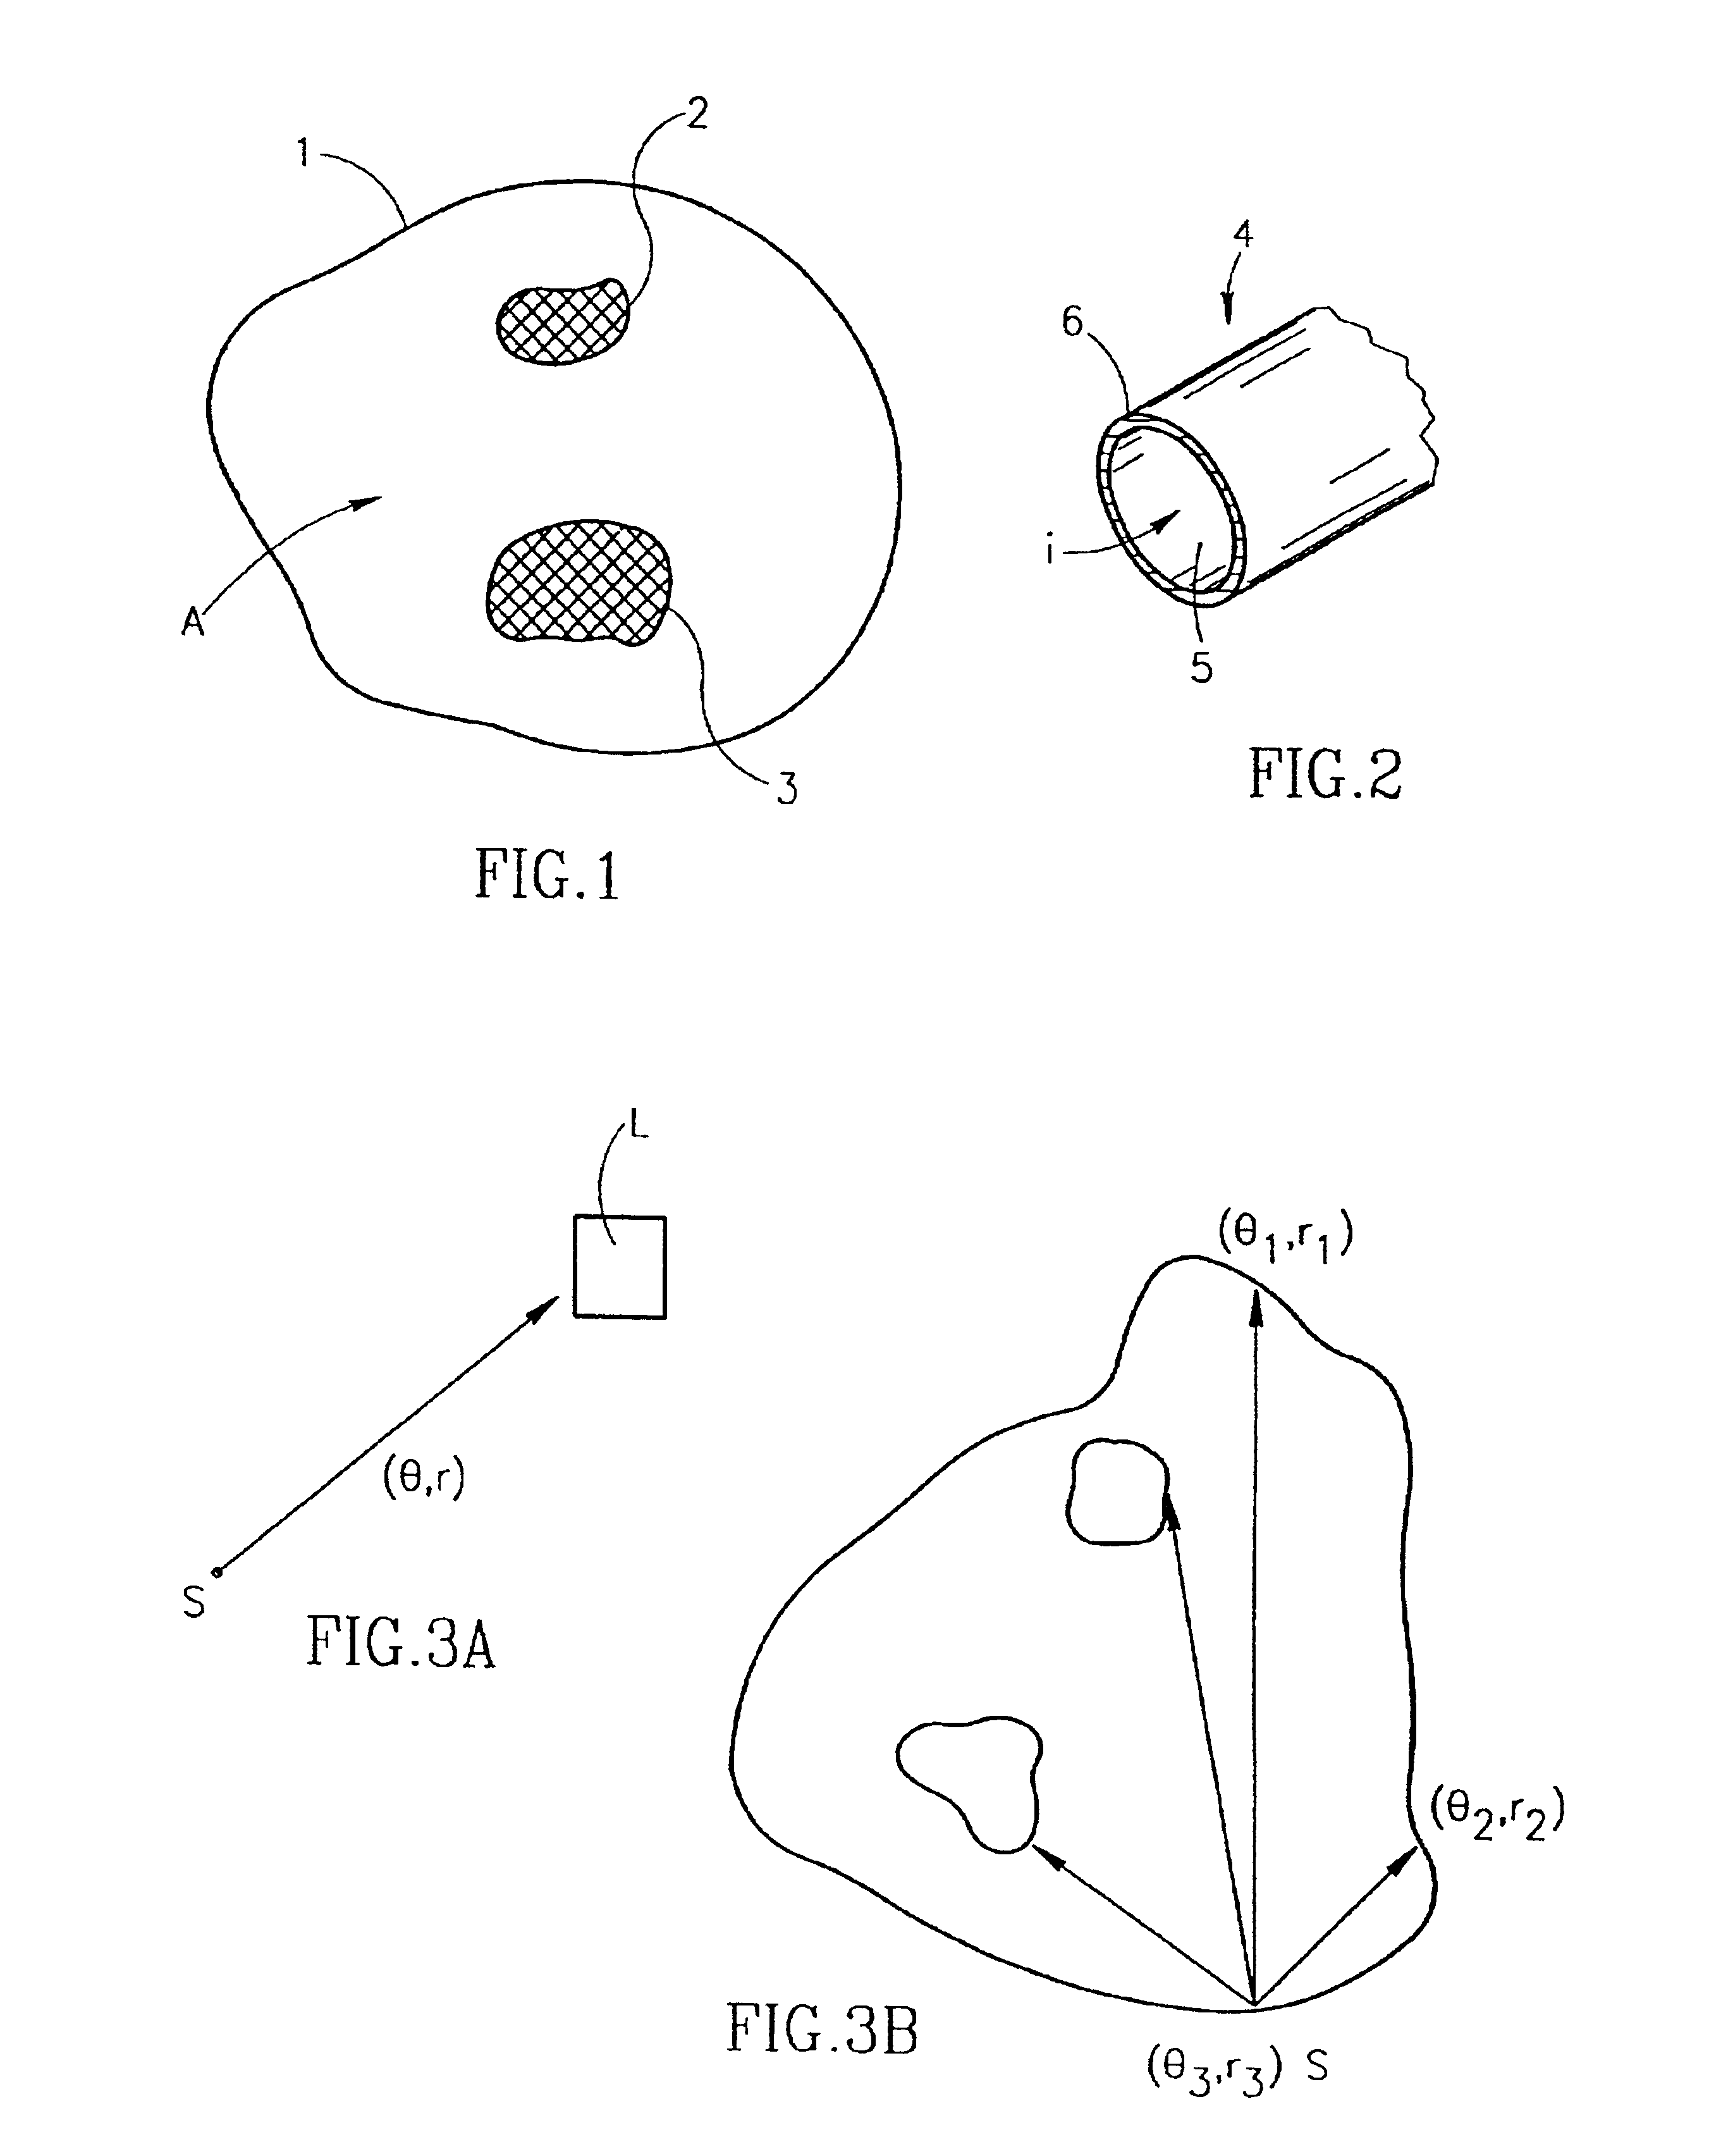 Navigation method and system for autonomous machines with markers defining the working area